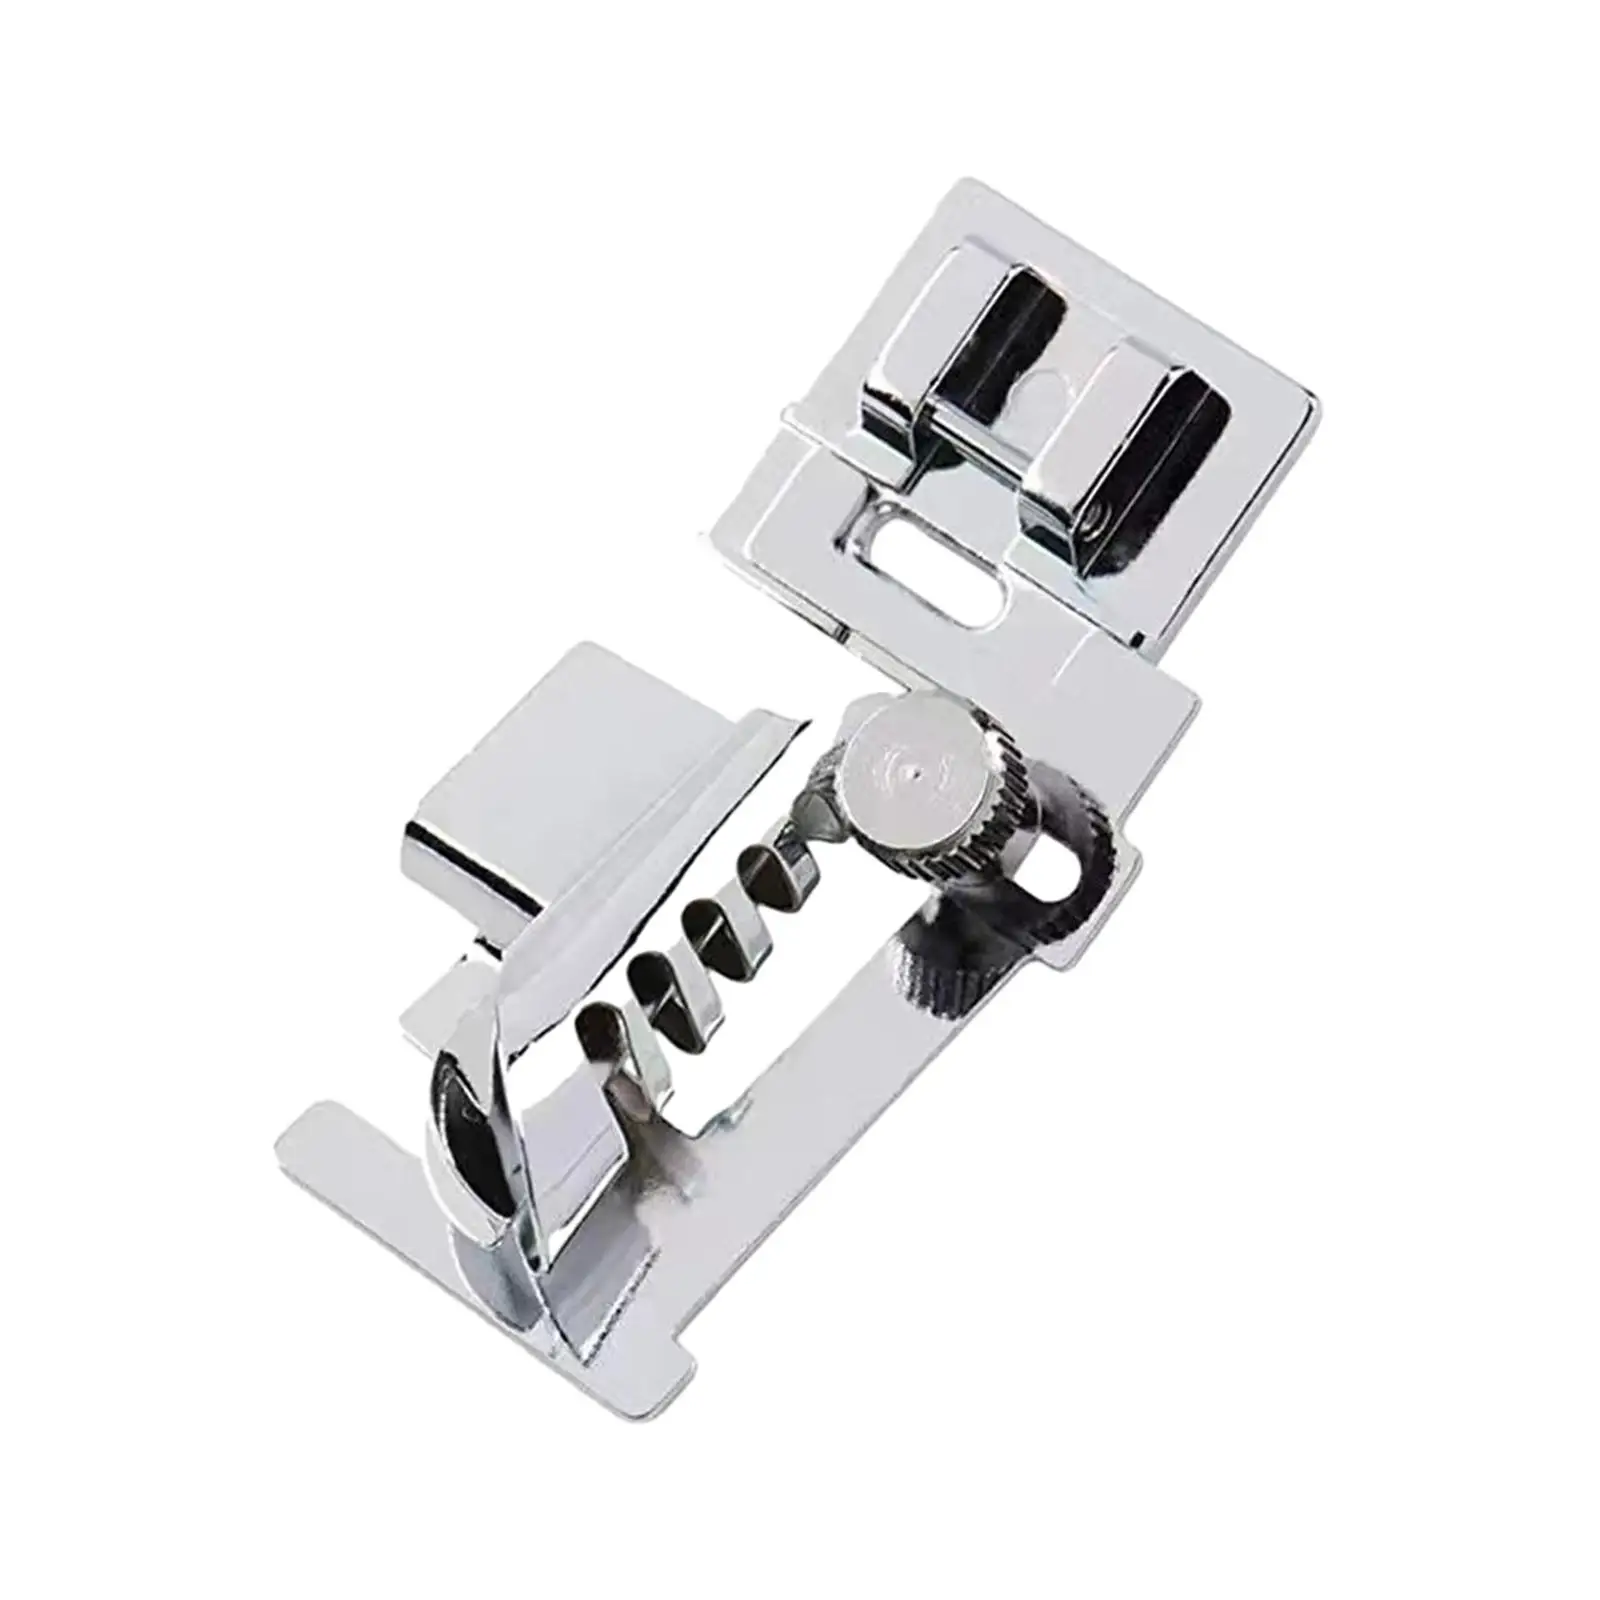 Presser Foot, Foot, Home Starters Non Slip Sturdy Sewing Machine Parts Sewing Machine Guide for DIY Crafts, Overlock